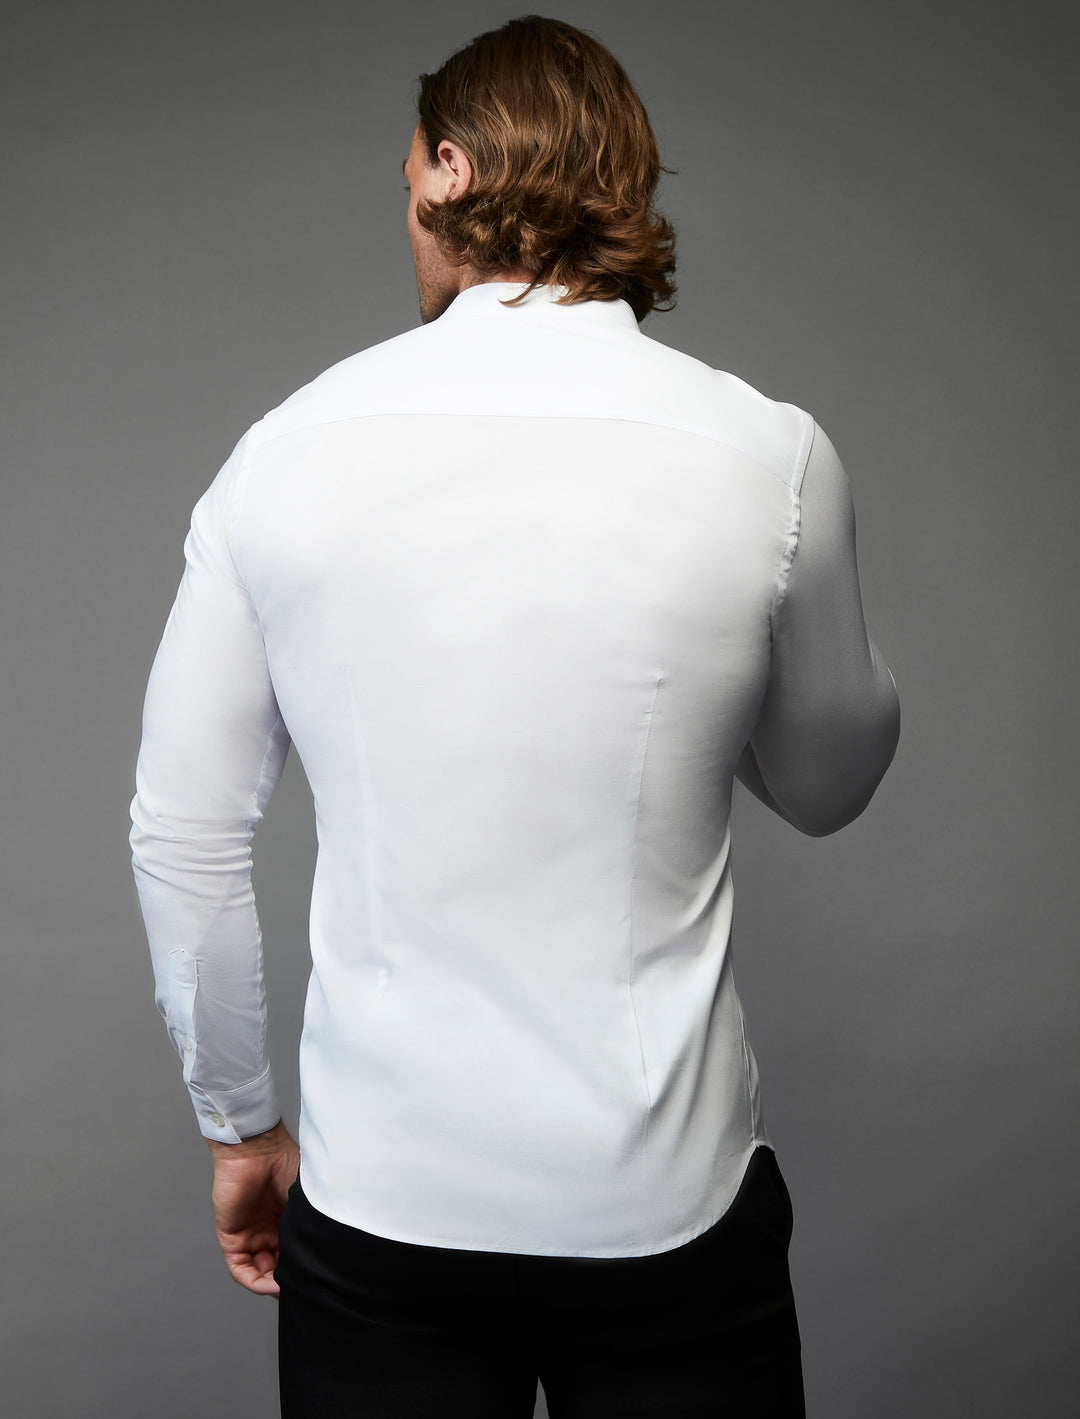 White grandad collar shirt designed for a tapered, muscular fit"